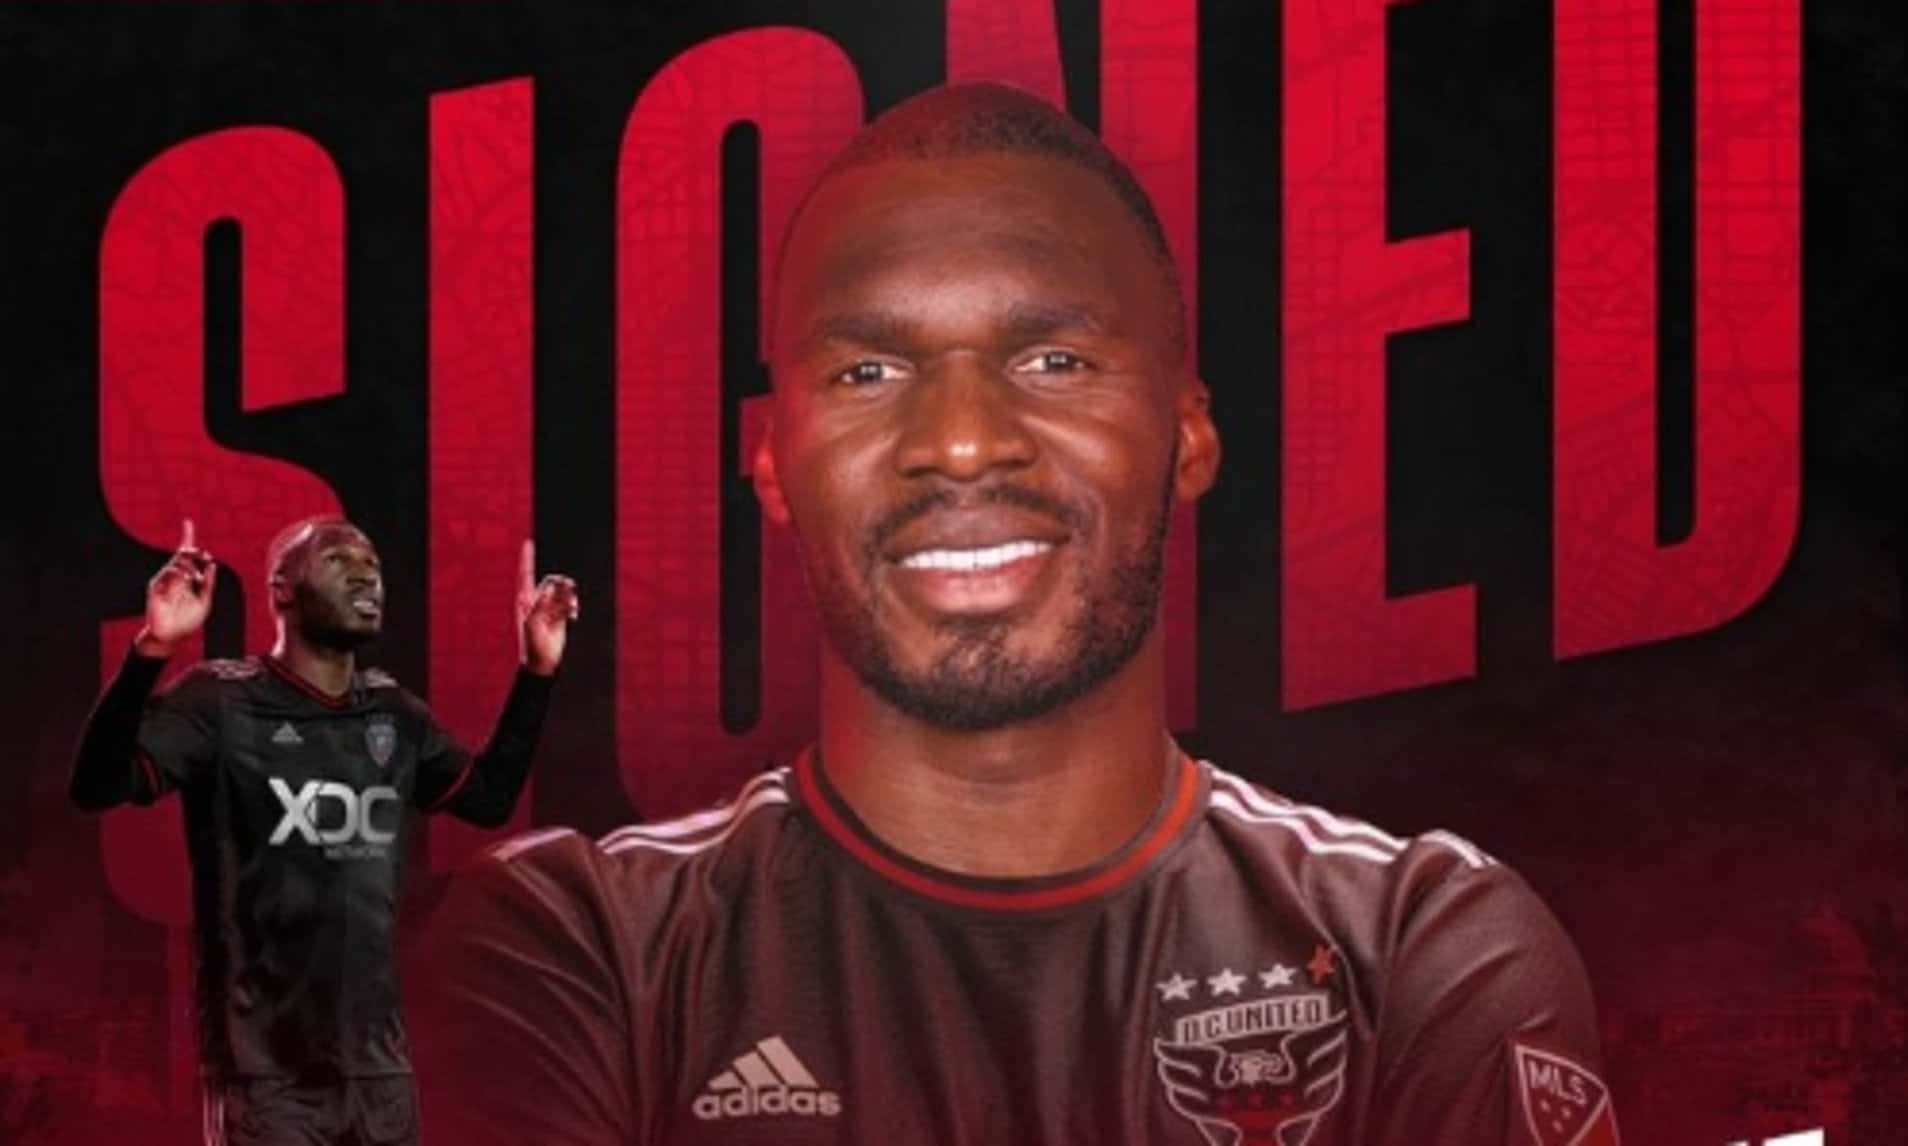 Christian Benteke Signed With D.C. United 2022 Wallpaper